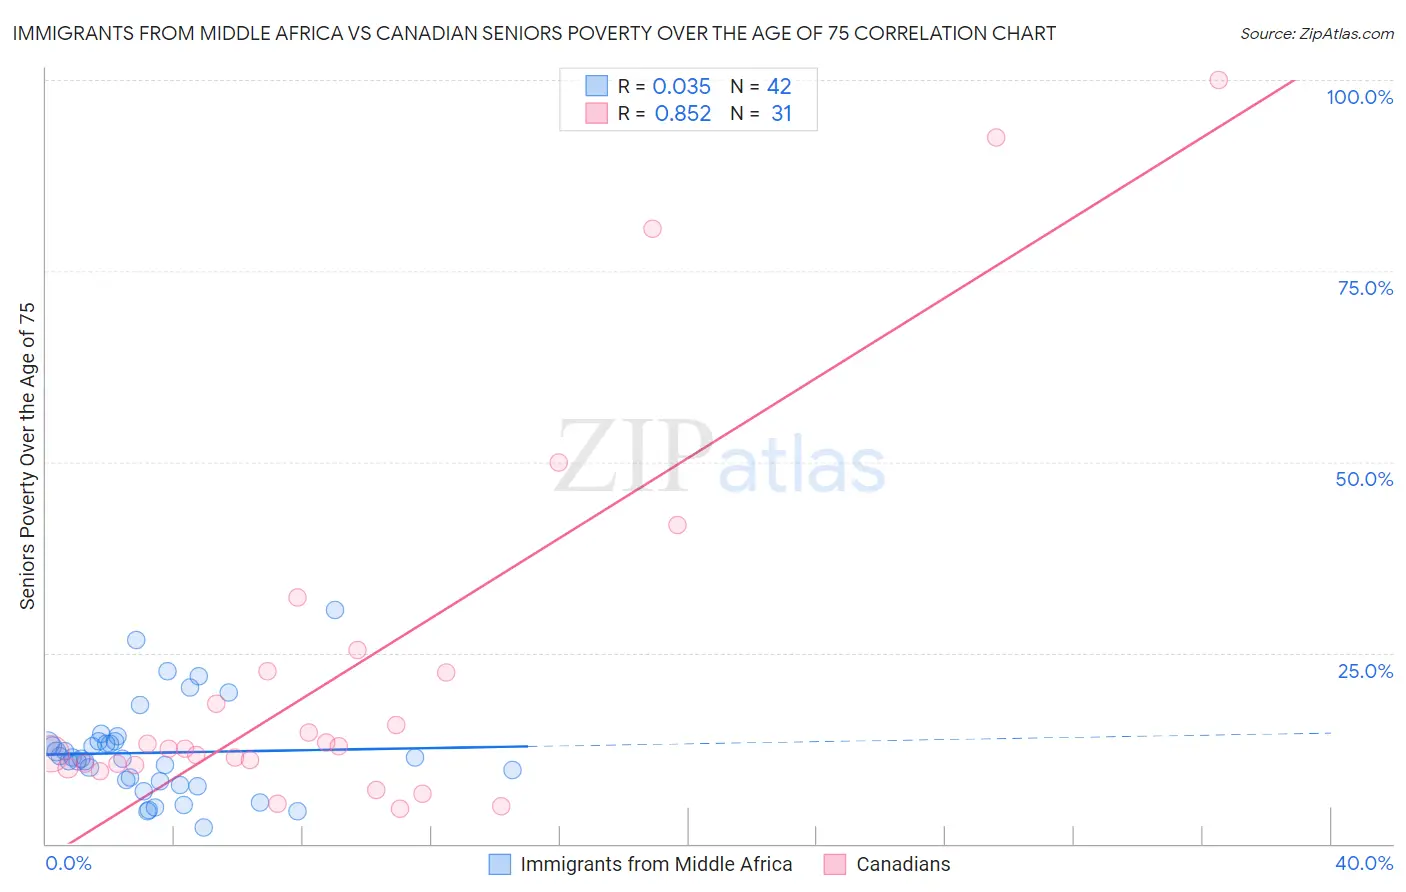 Immigrants from Middle Africa vs Canadian Seniors Poverty Over the Age of 75